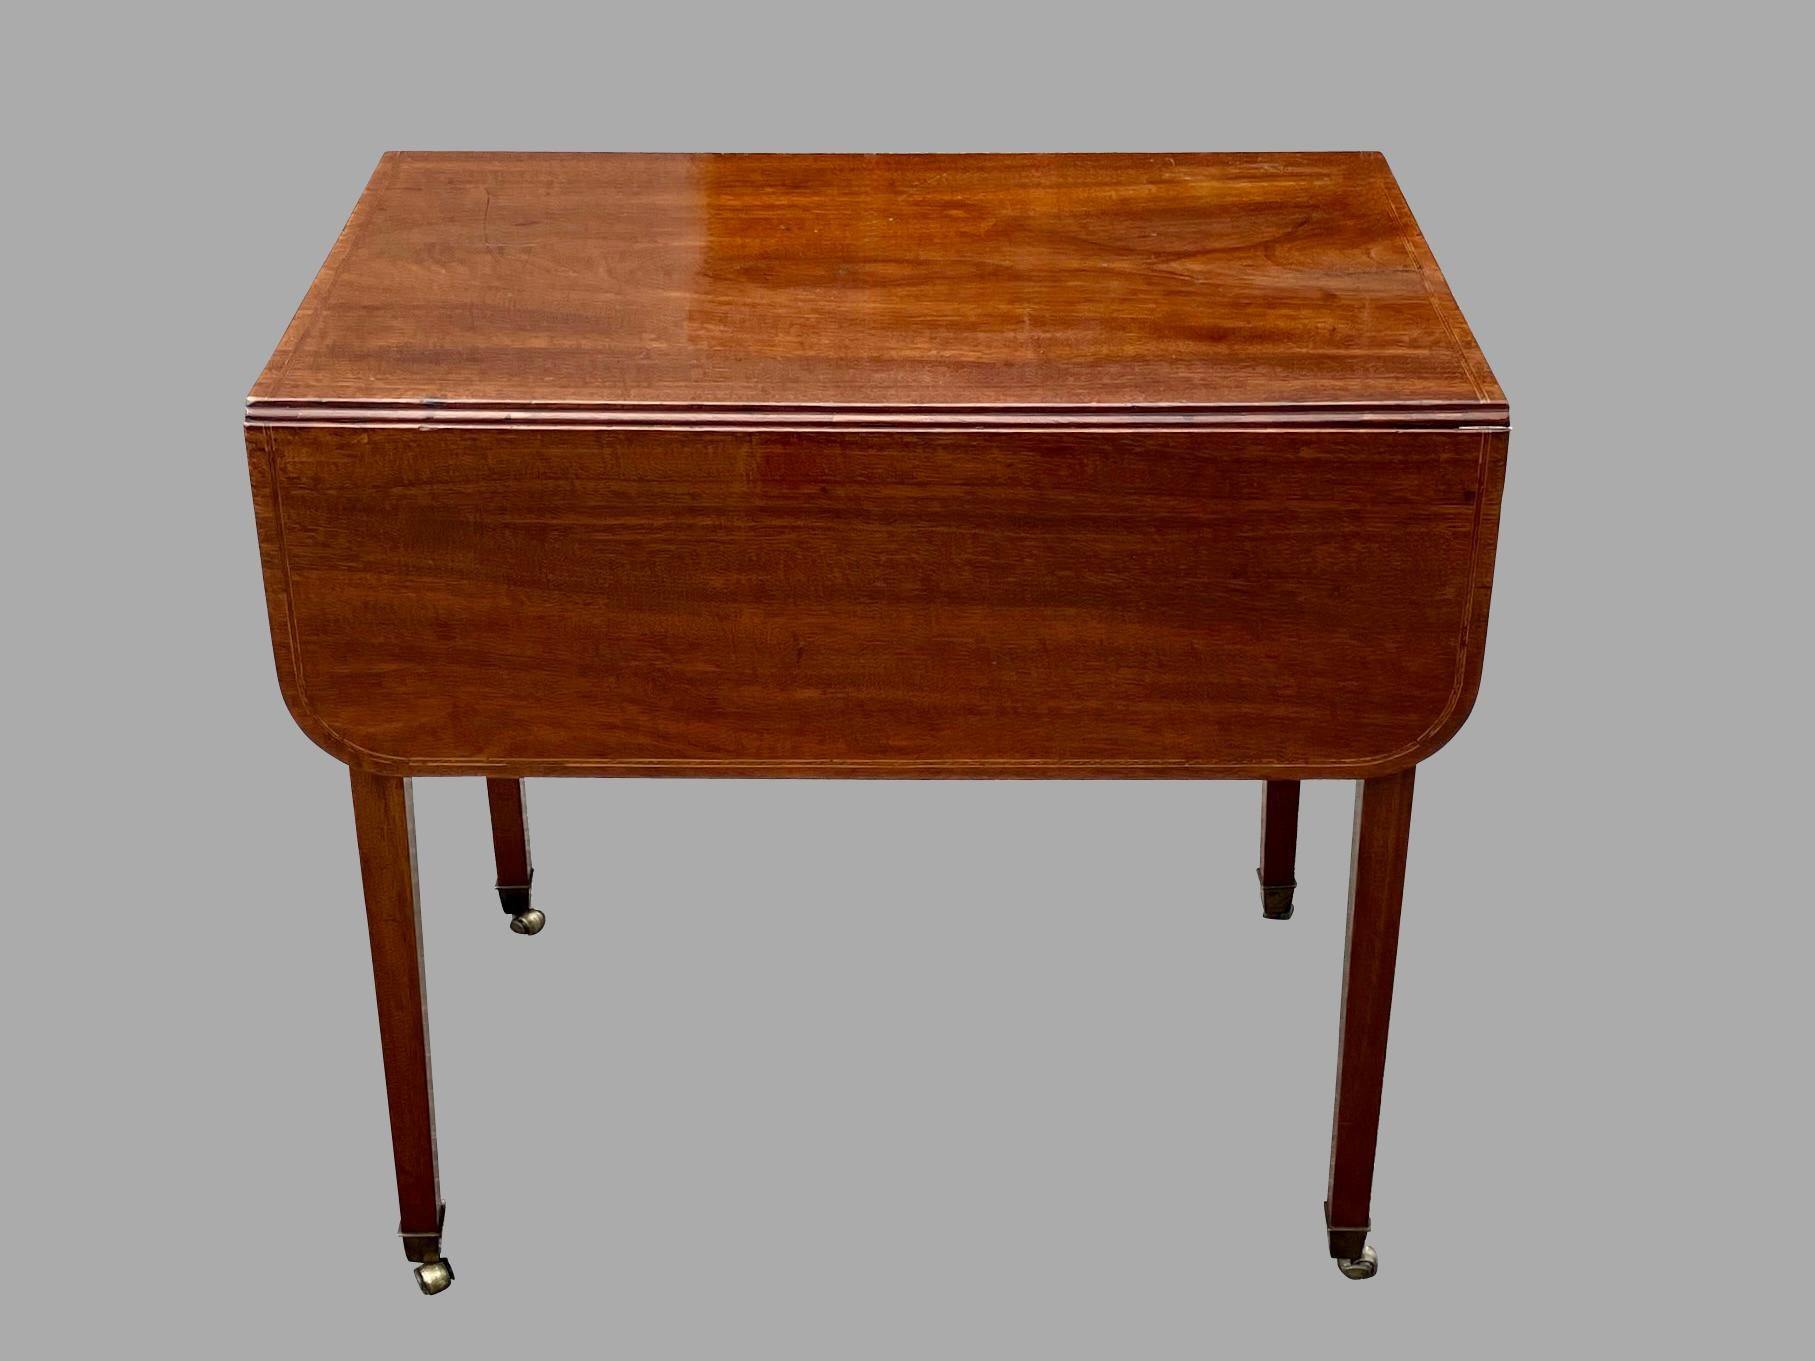 19th Century English Rectangular Georgian Period Mahogany Pembroke Table with Single Drawer For Sale